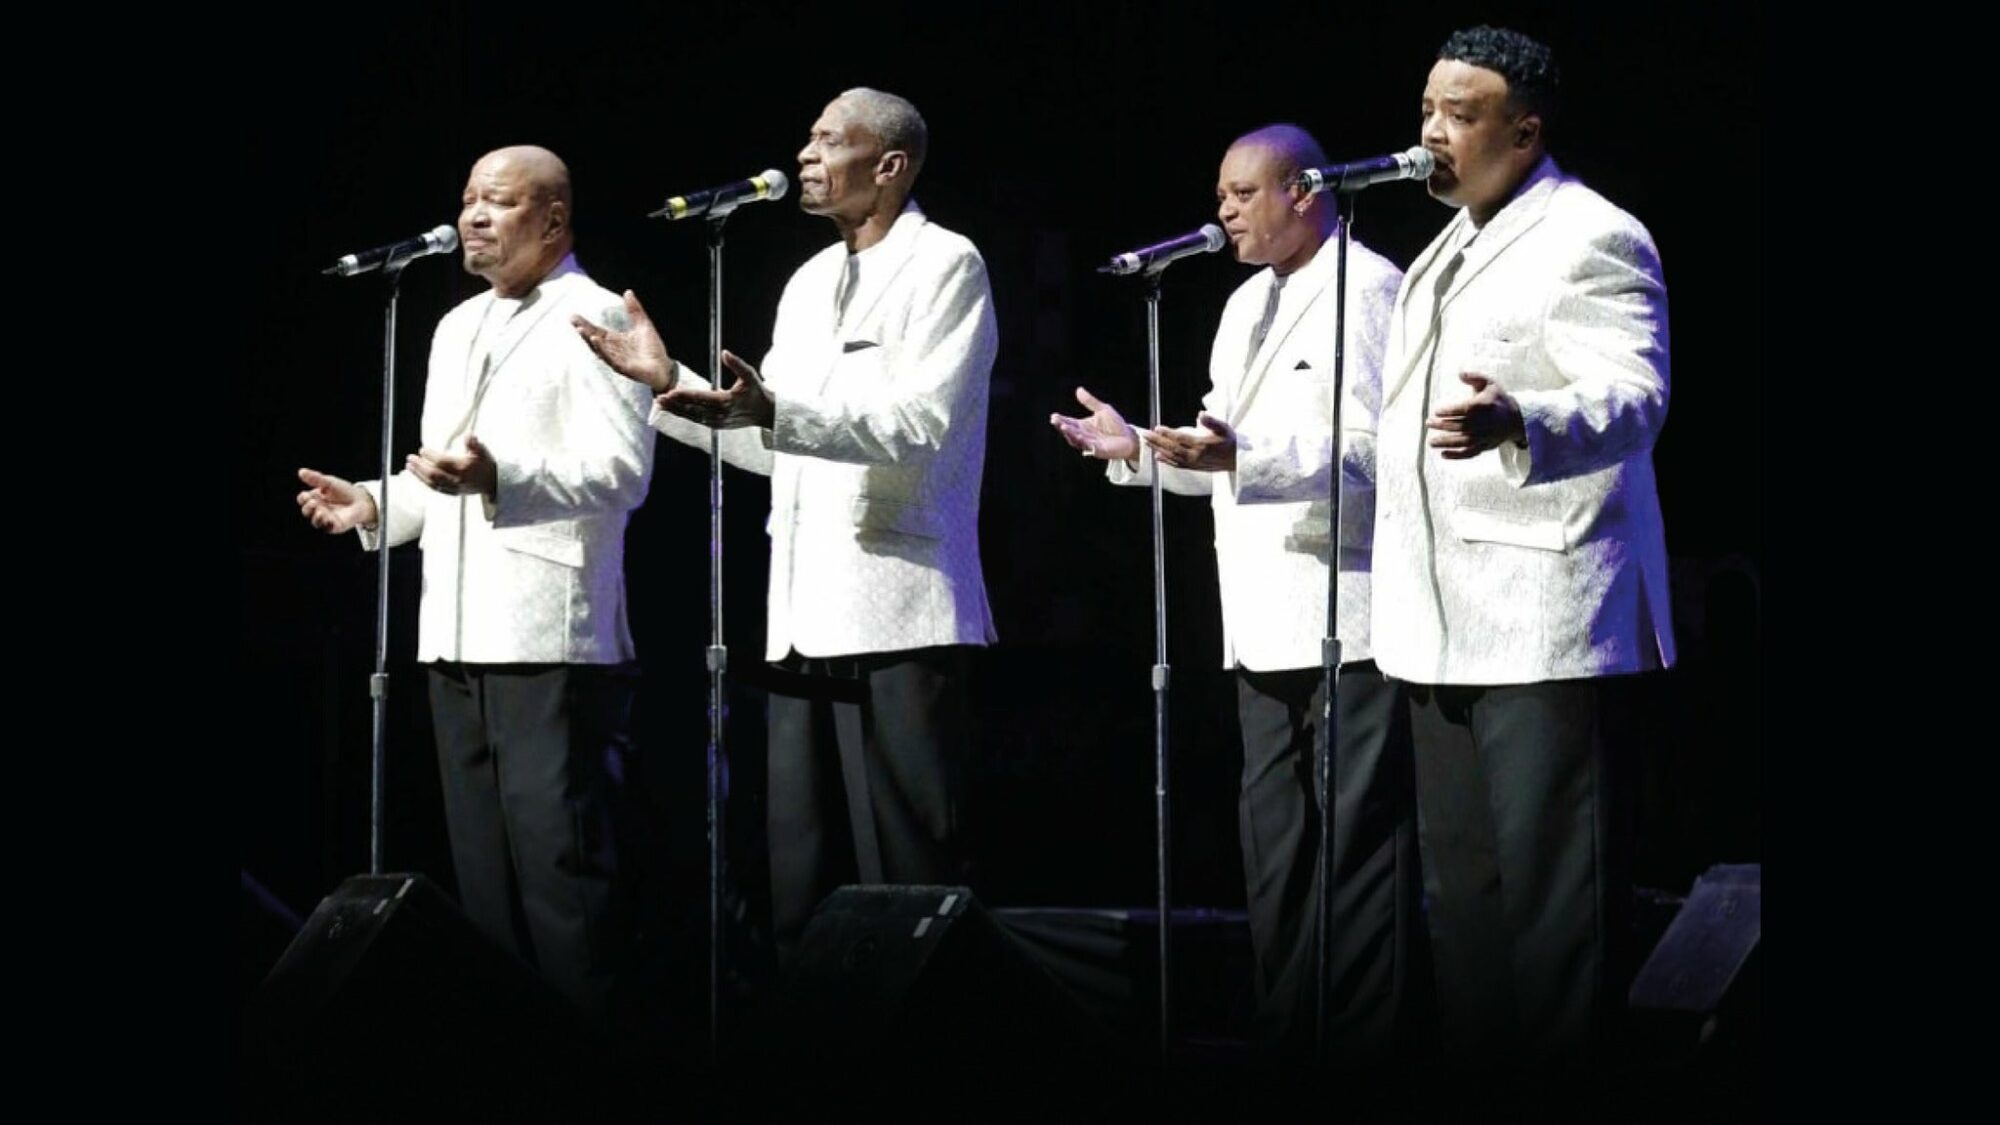 Image name The Stylistics at Sheffield City Hall Oval Hall Sheffield the 8 image from the post Events in Yorkshire.com.